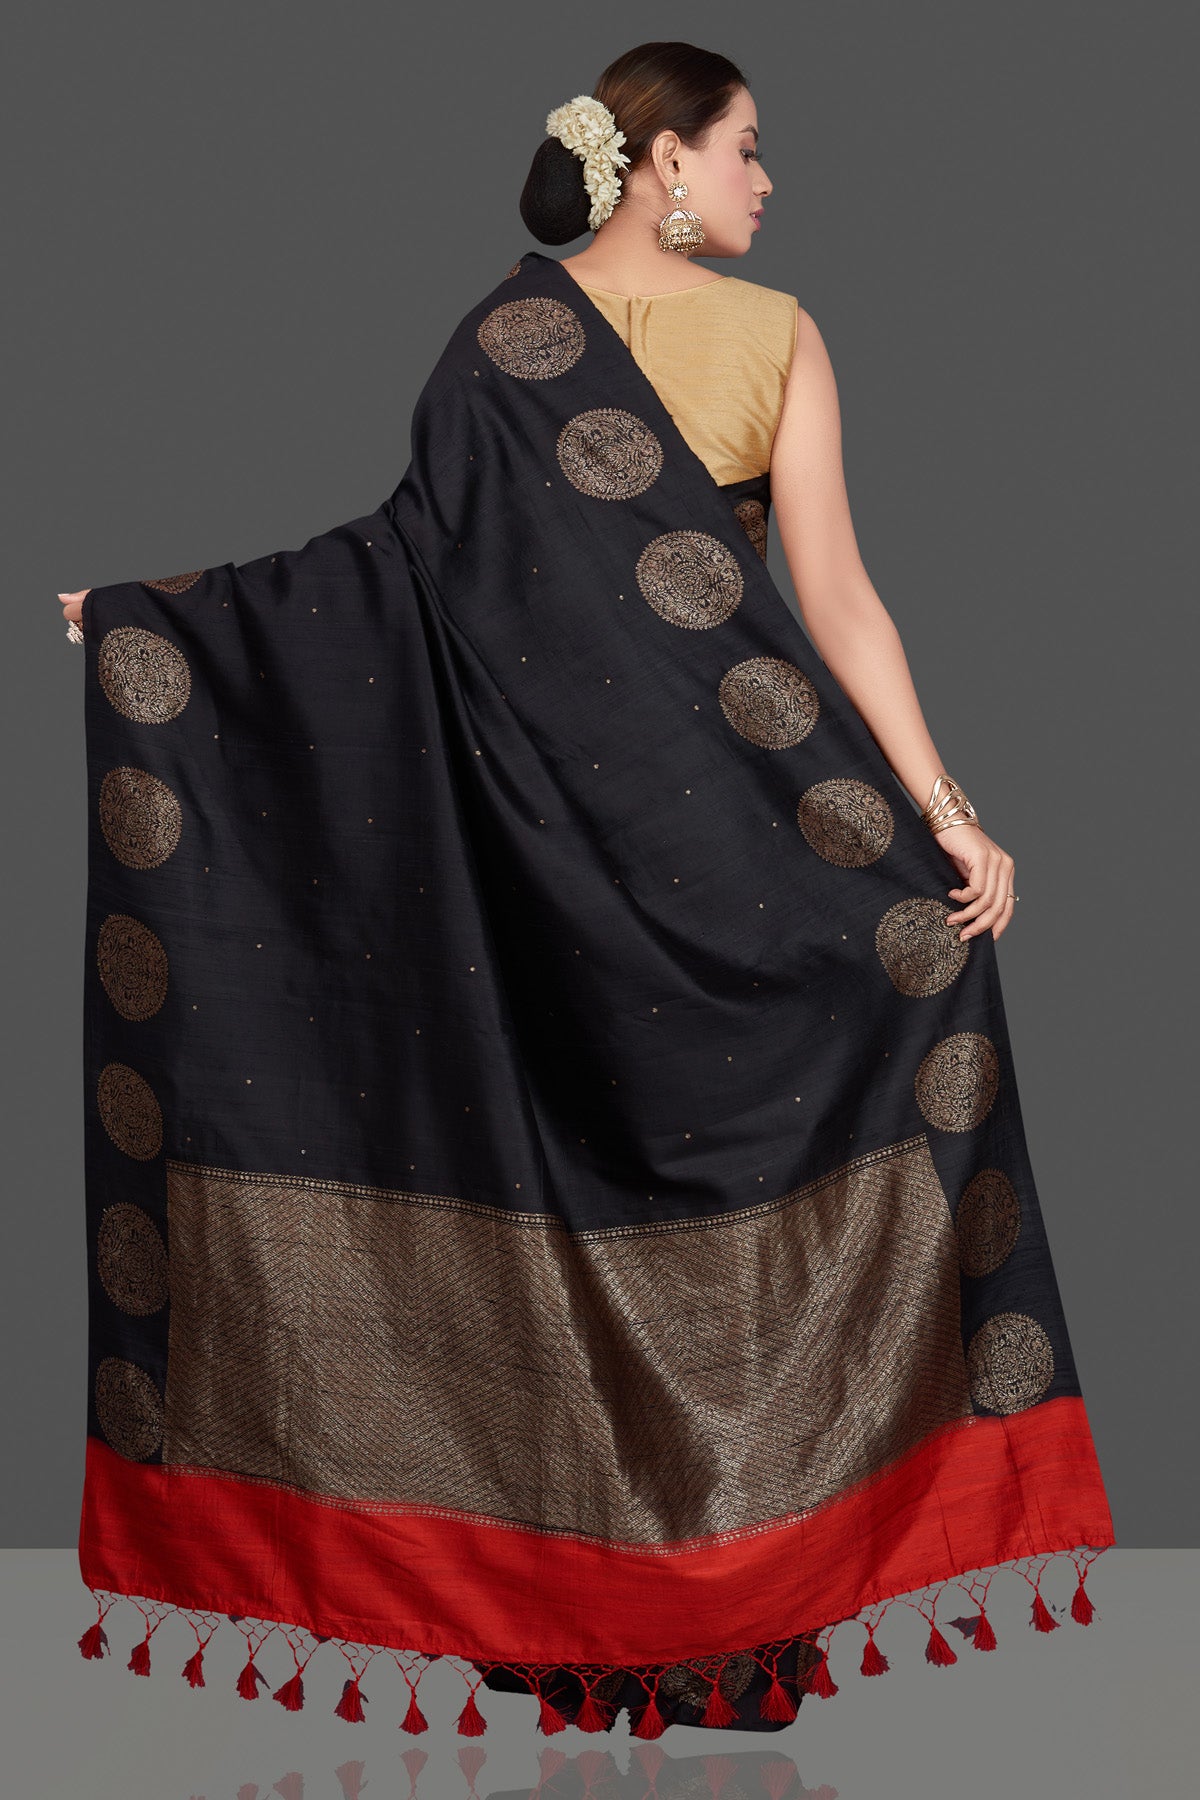 Buy ravishing black tussar Benarasi saree online in USA with antique zari buta border. Go for stunning Indian designer sarees, georgette sarees, handwoven saris, embroidered sarees for festive occasions and weddings from Pure Elegance Indian clothing store in USA.-back